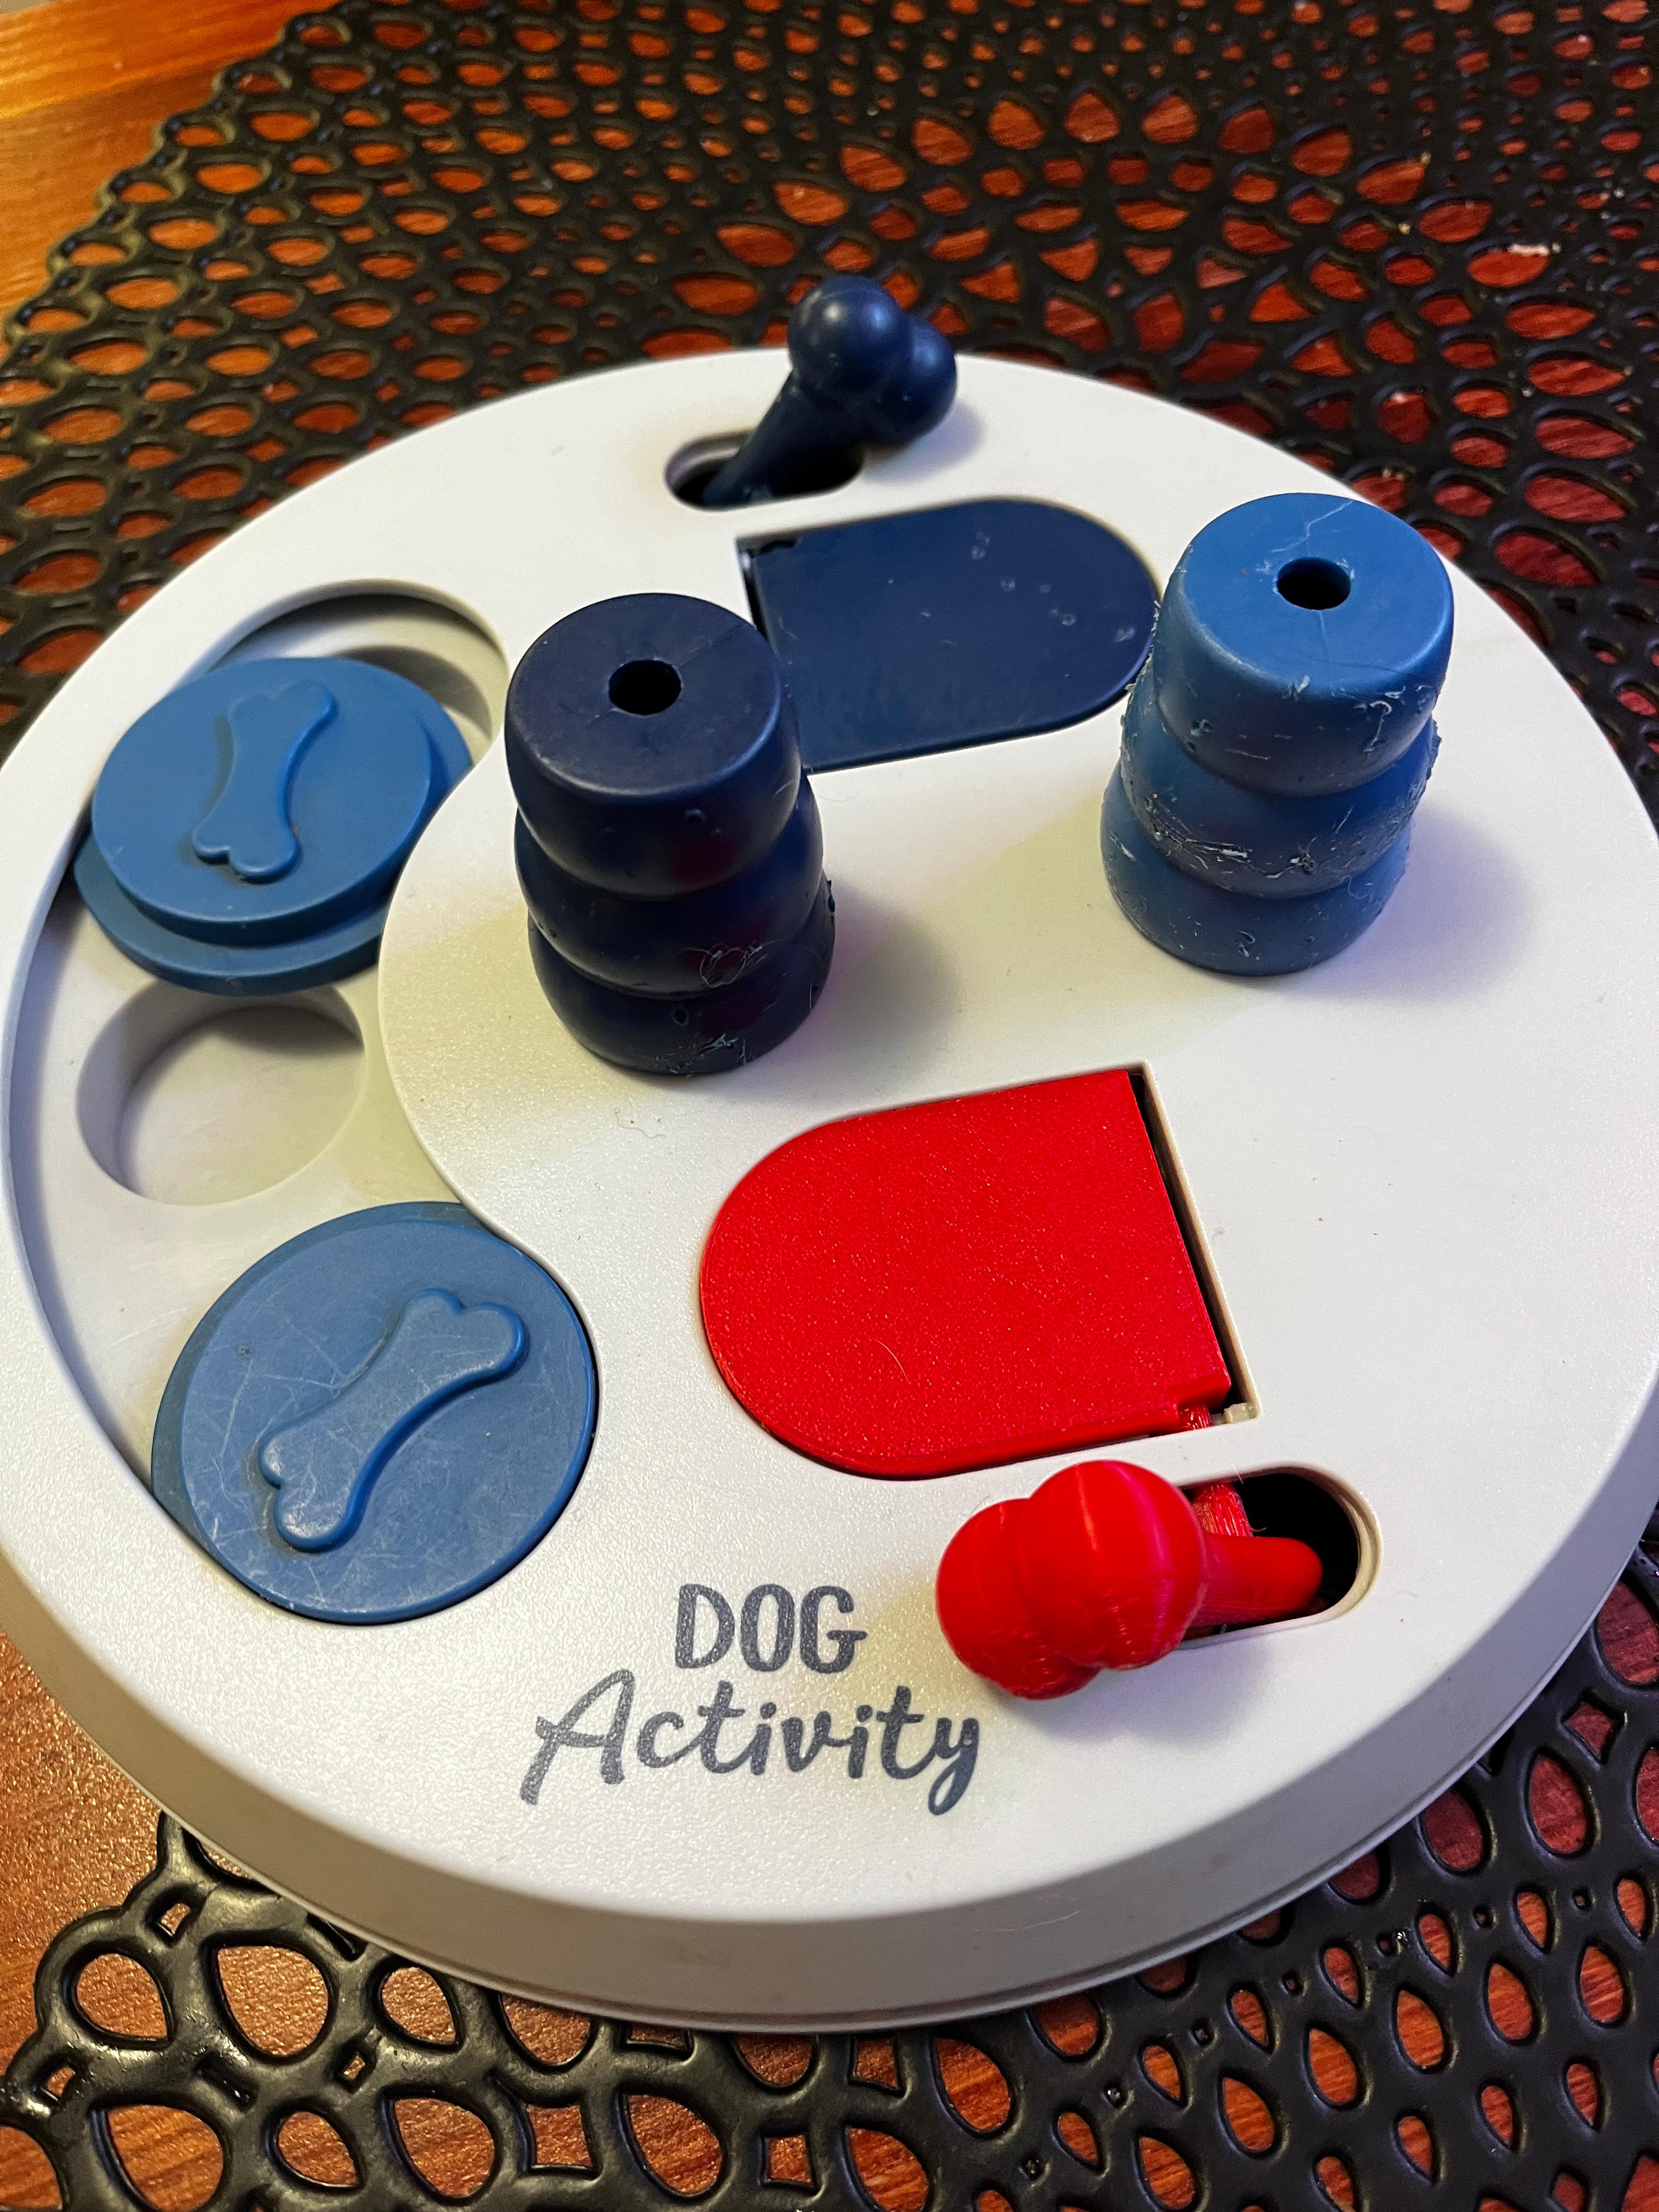 TRIXIE ACTIVITY DOG Flip board hinged lid 3d model